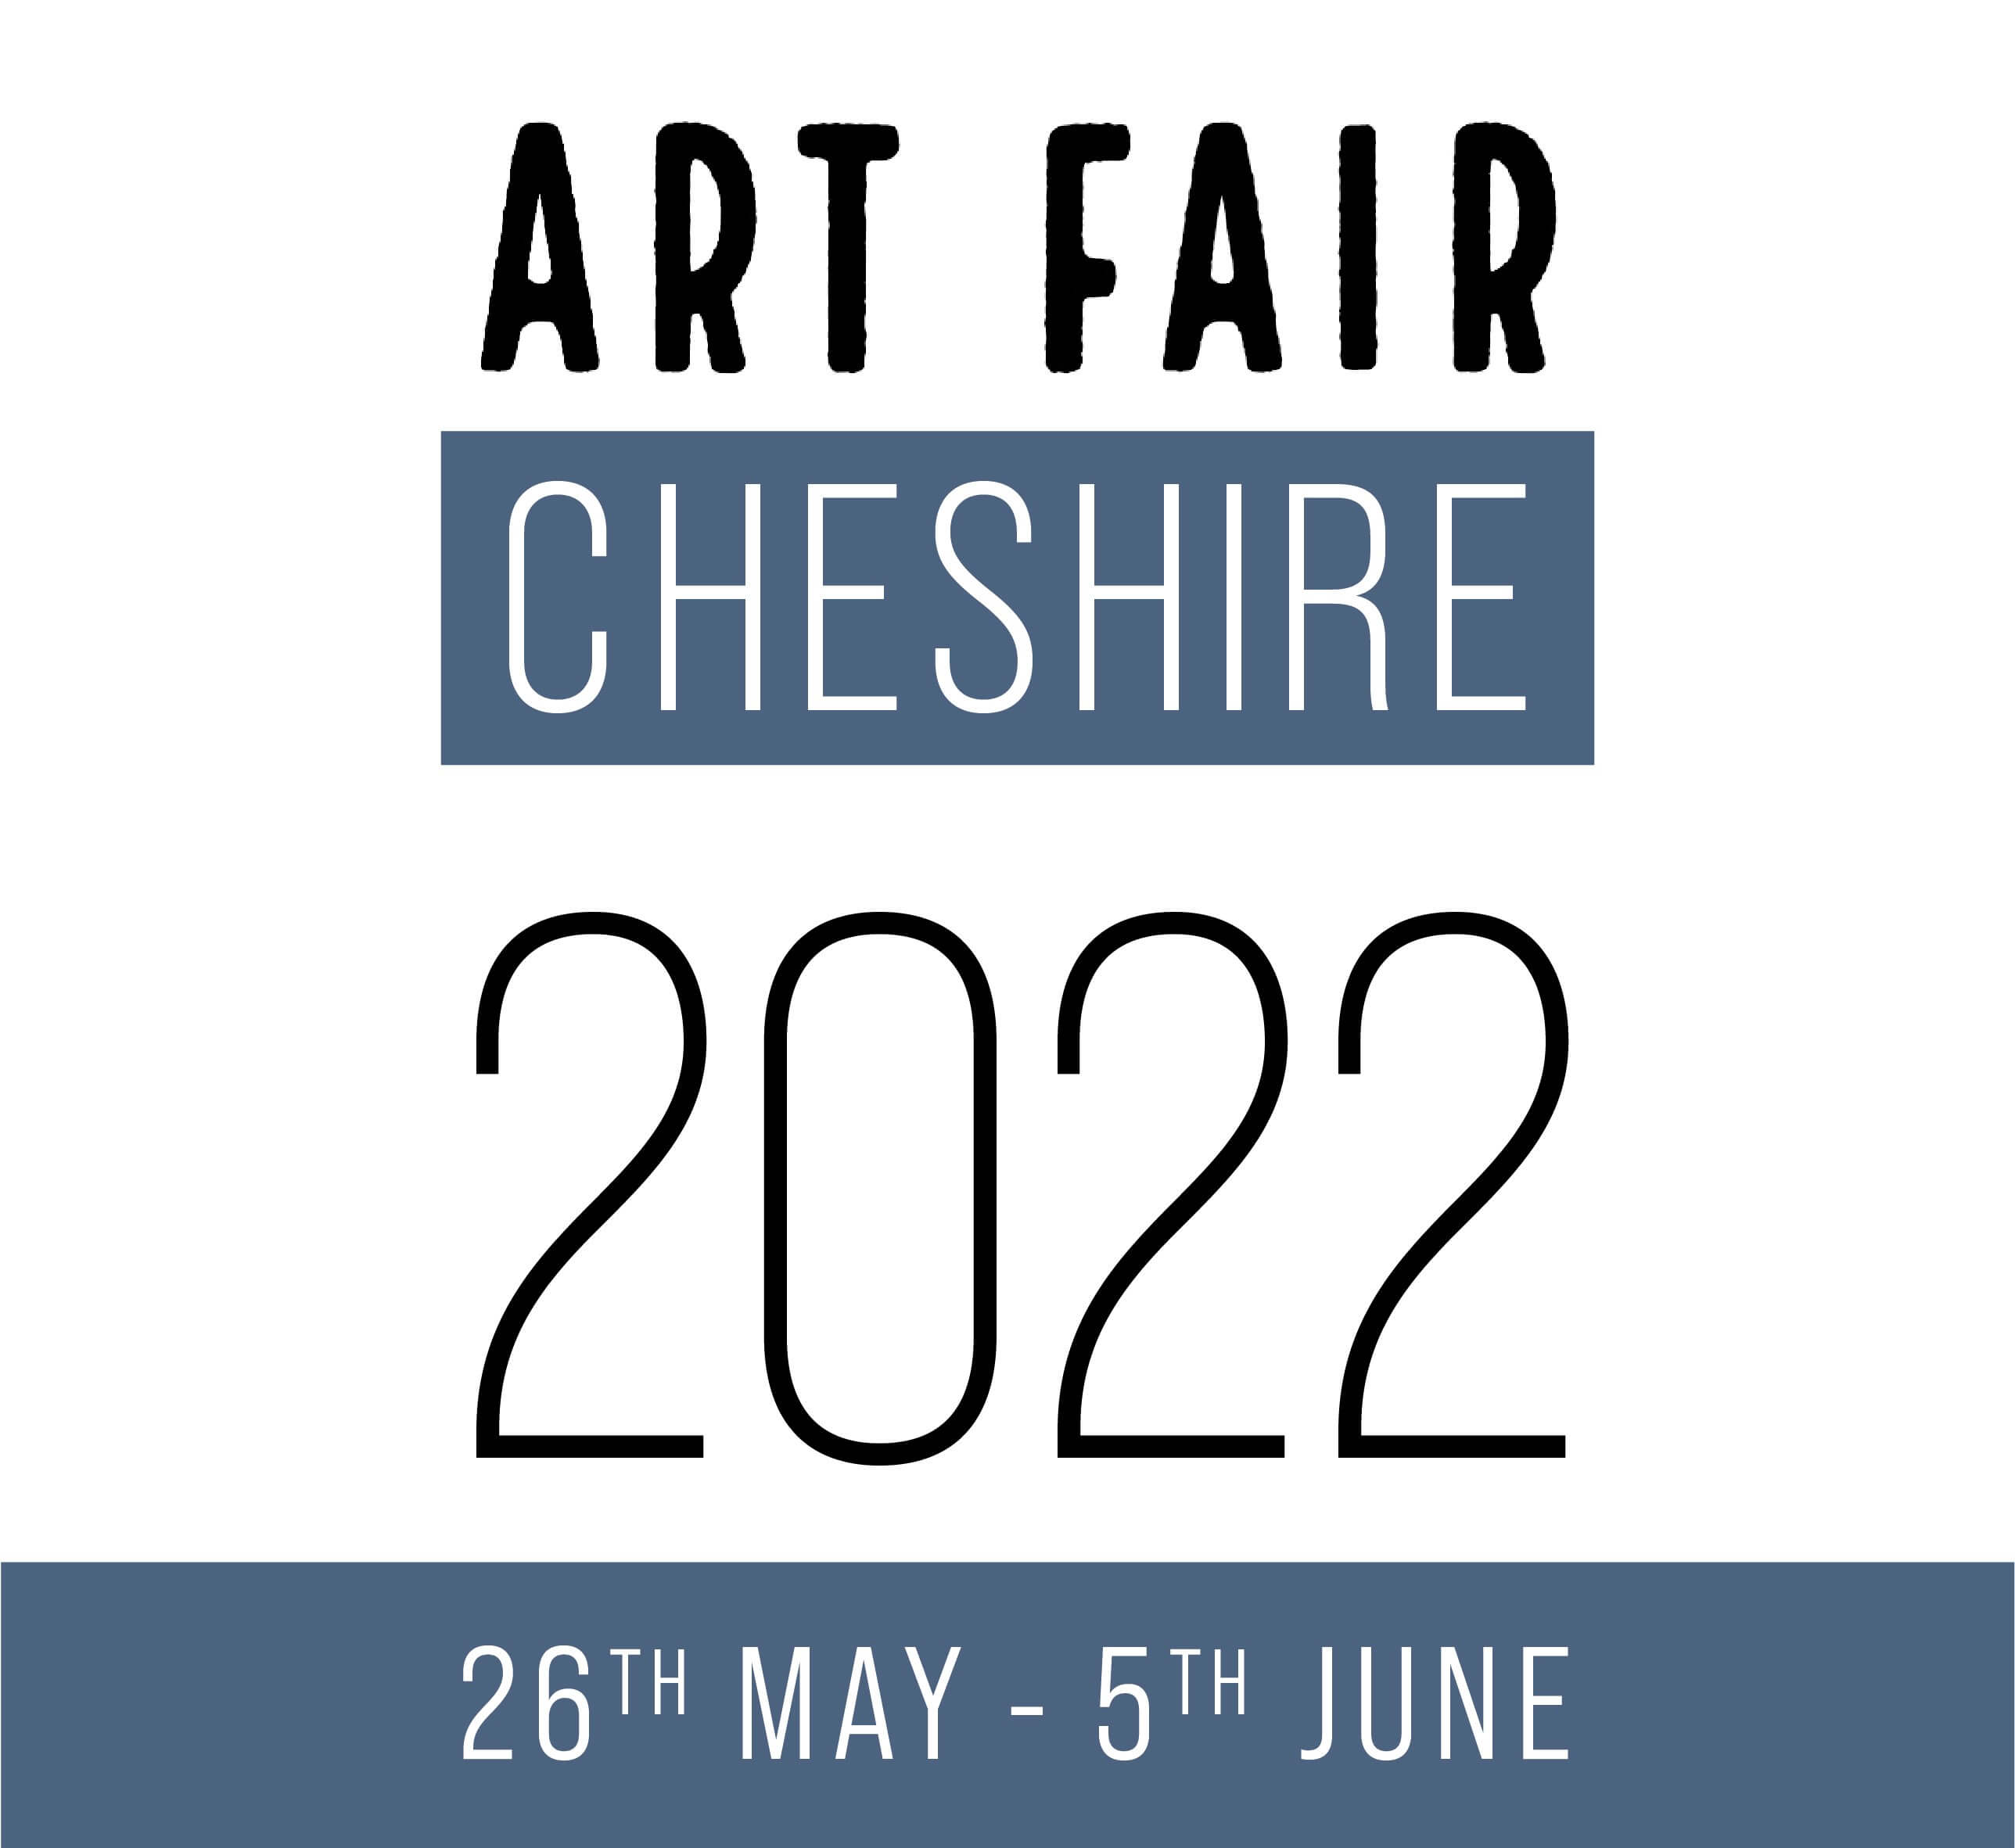 Networking Breakfast with Art Fair Cheshire